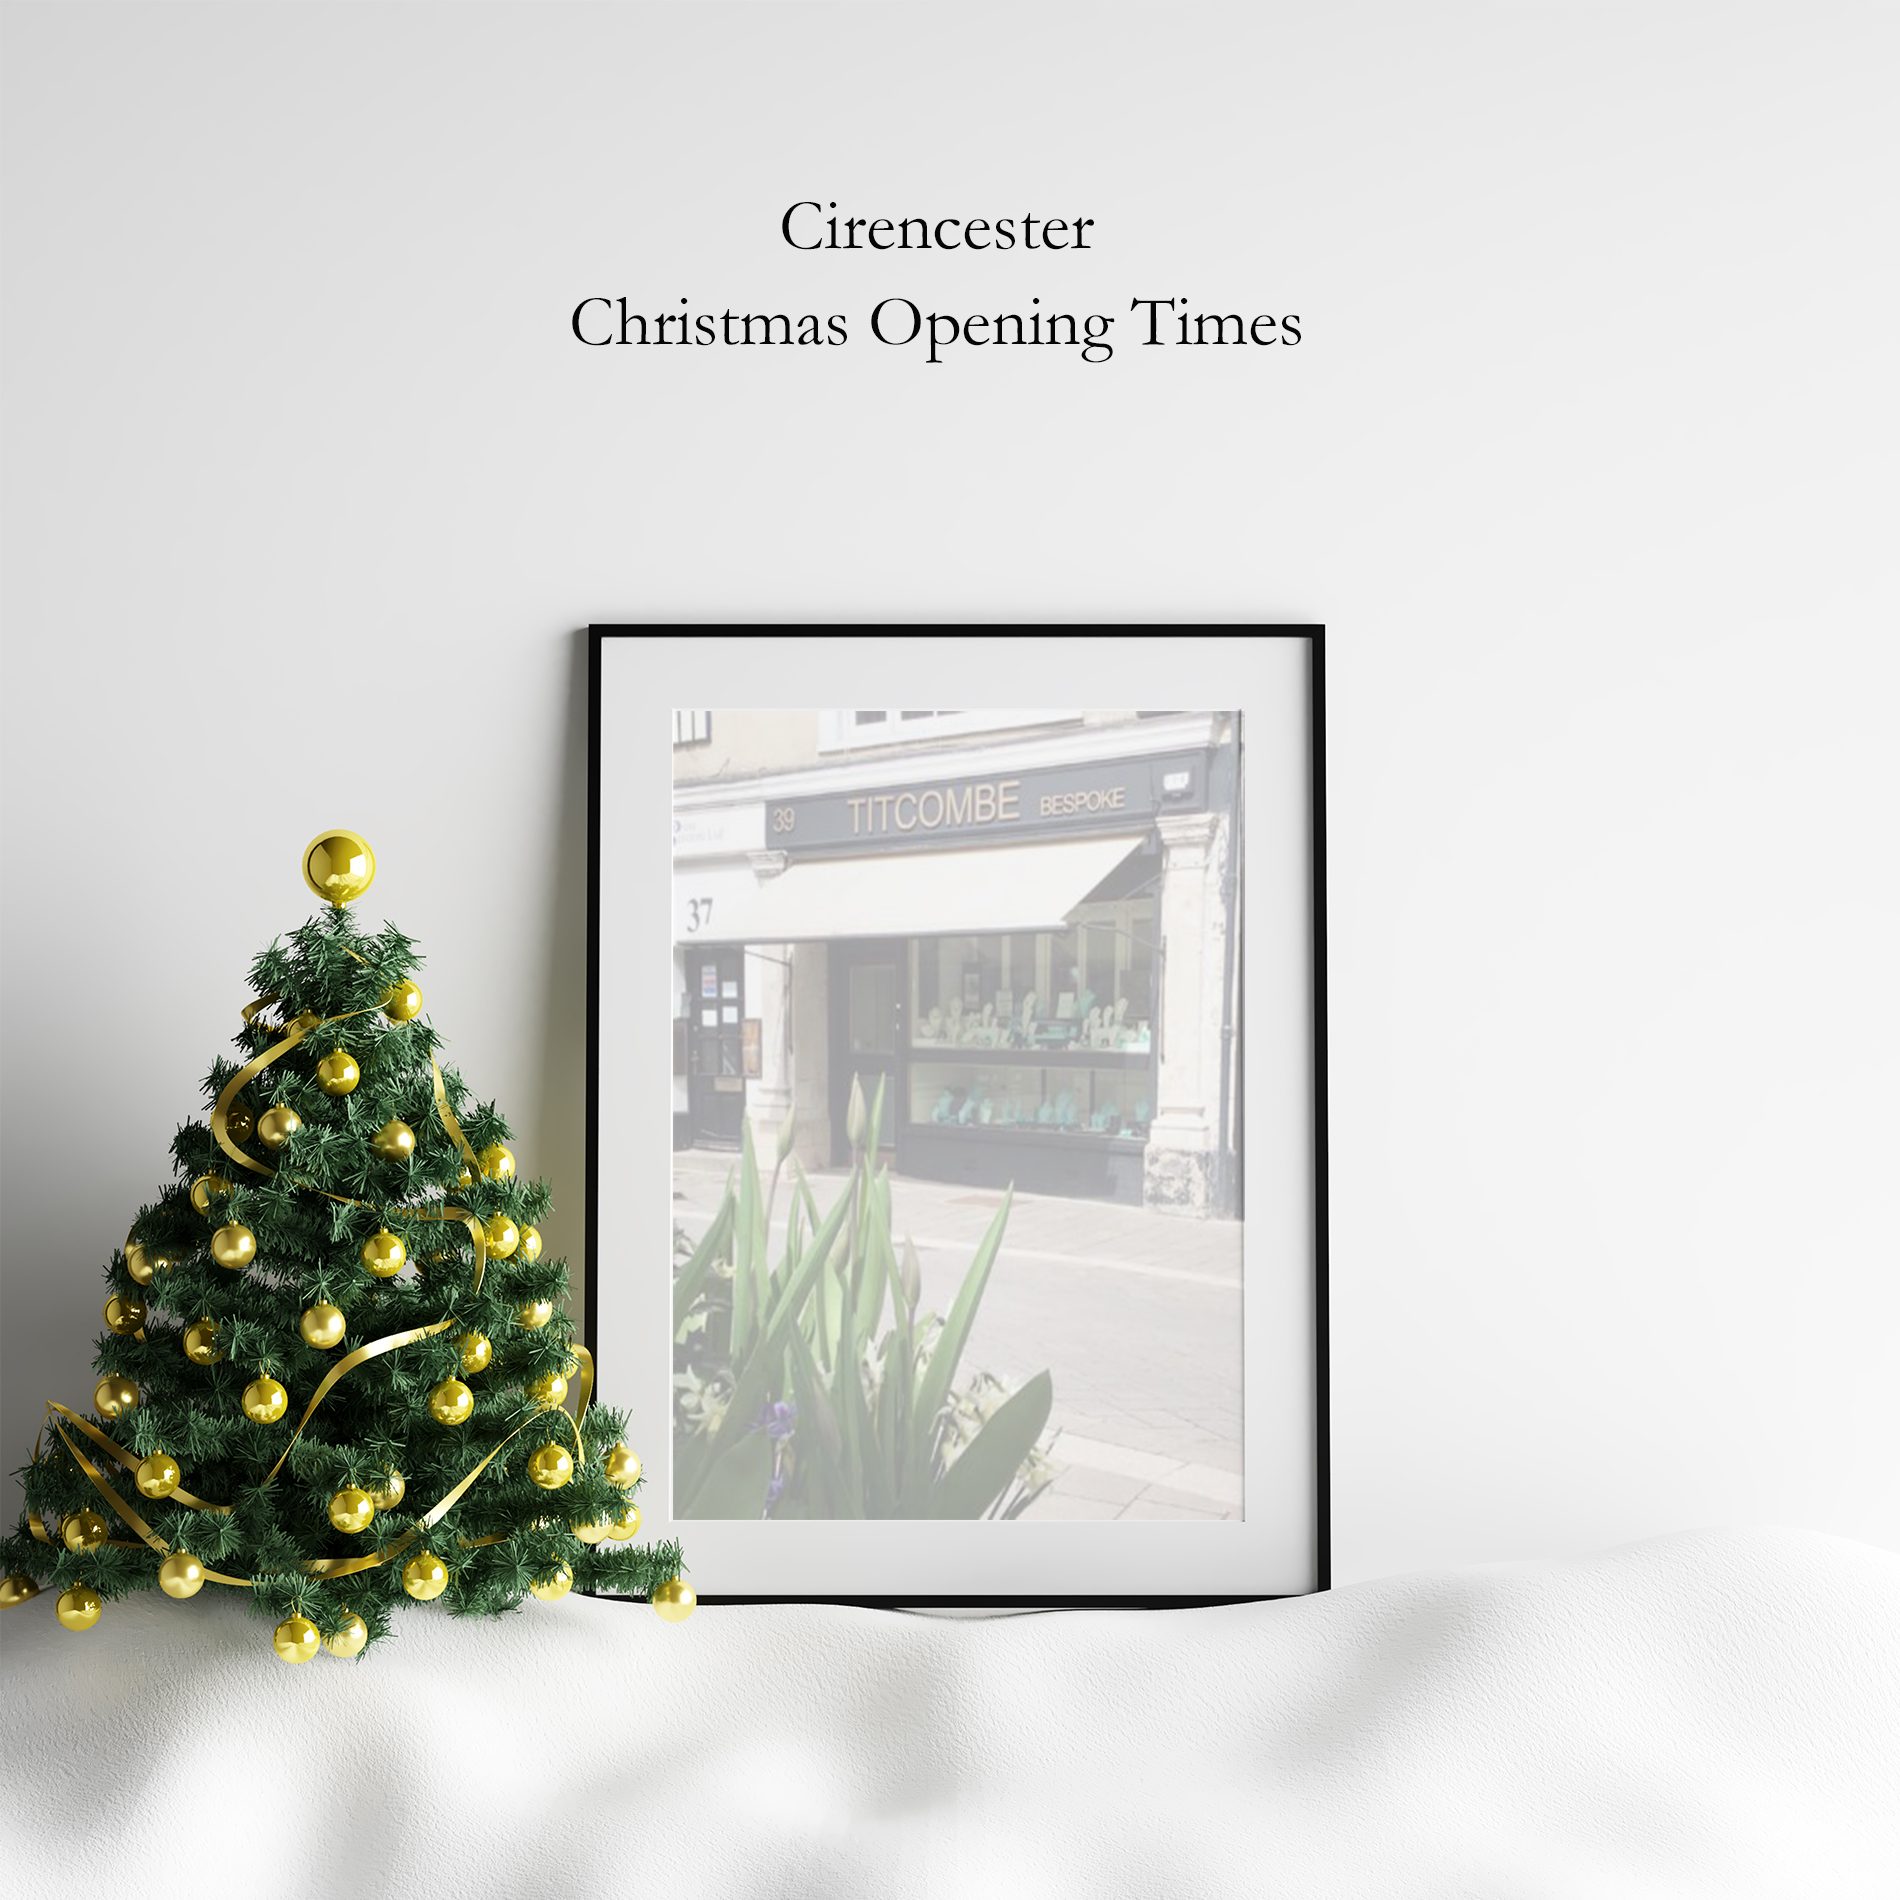 Cirencester Christmas Opening Hours